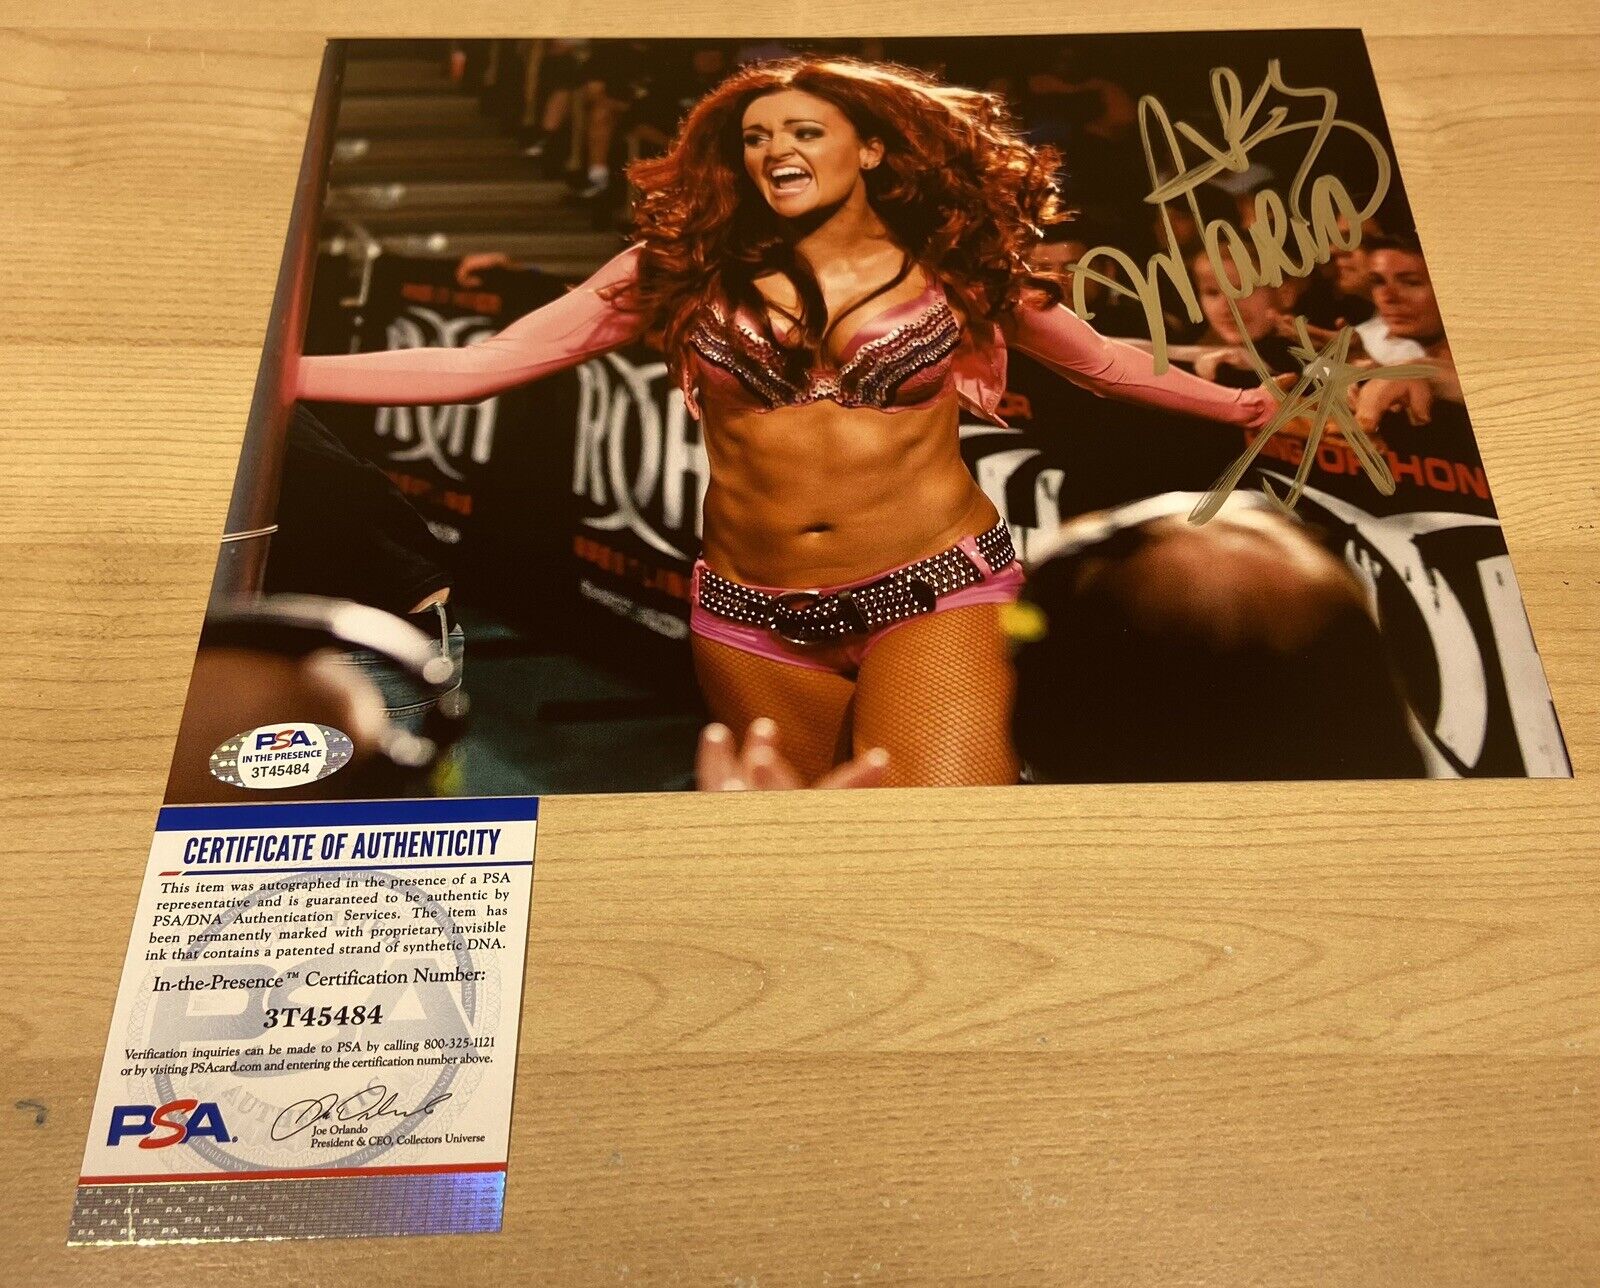 Maria Kanellis WWE ROH Autographed Signed 8X10 Photo Poster painting PSA/DNA Witnessed COA